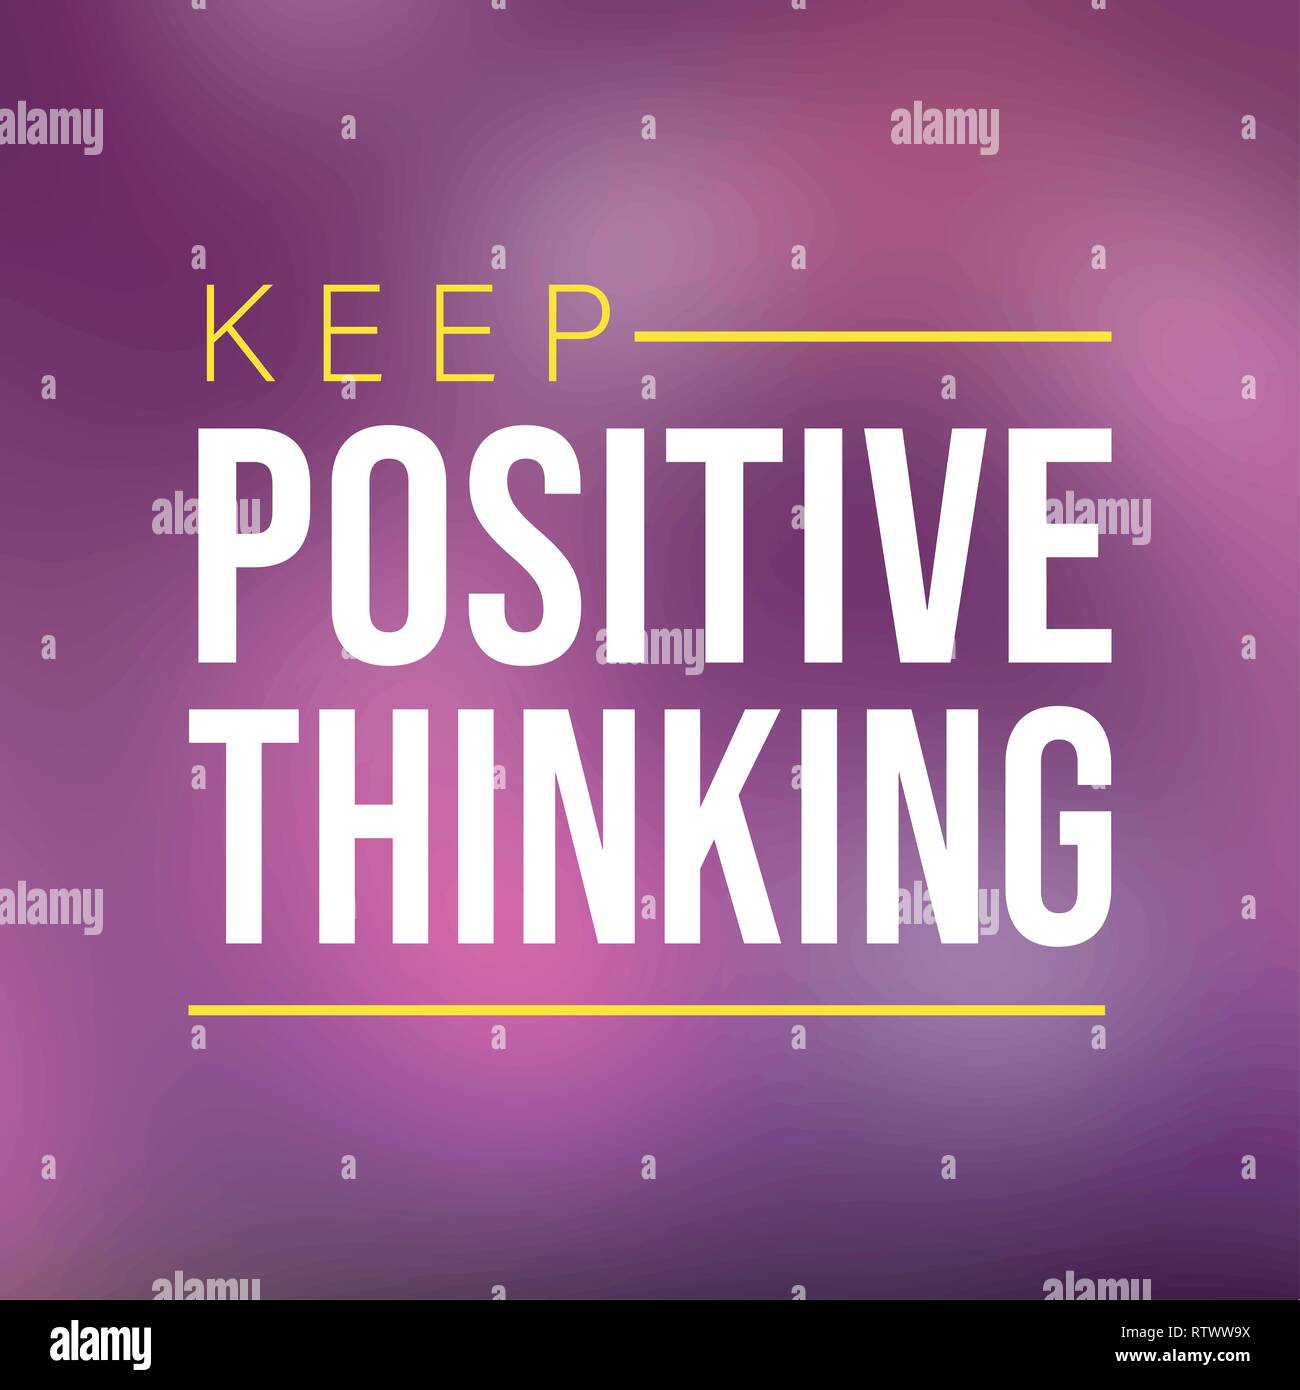 keep positive thinking. Motivation quote with modern background vector ...